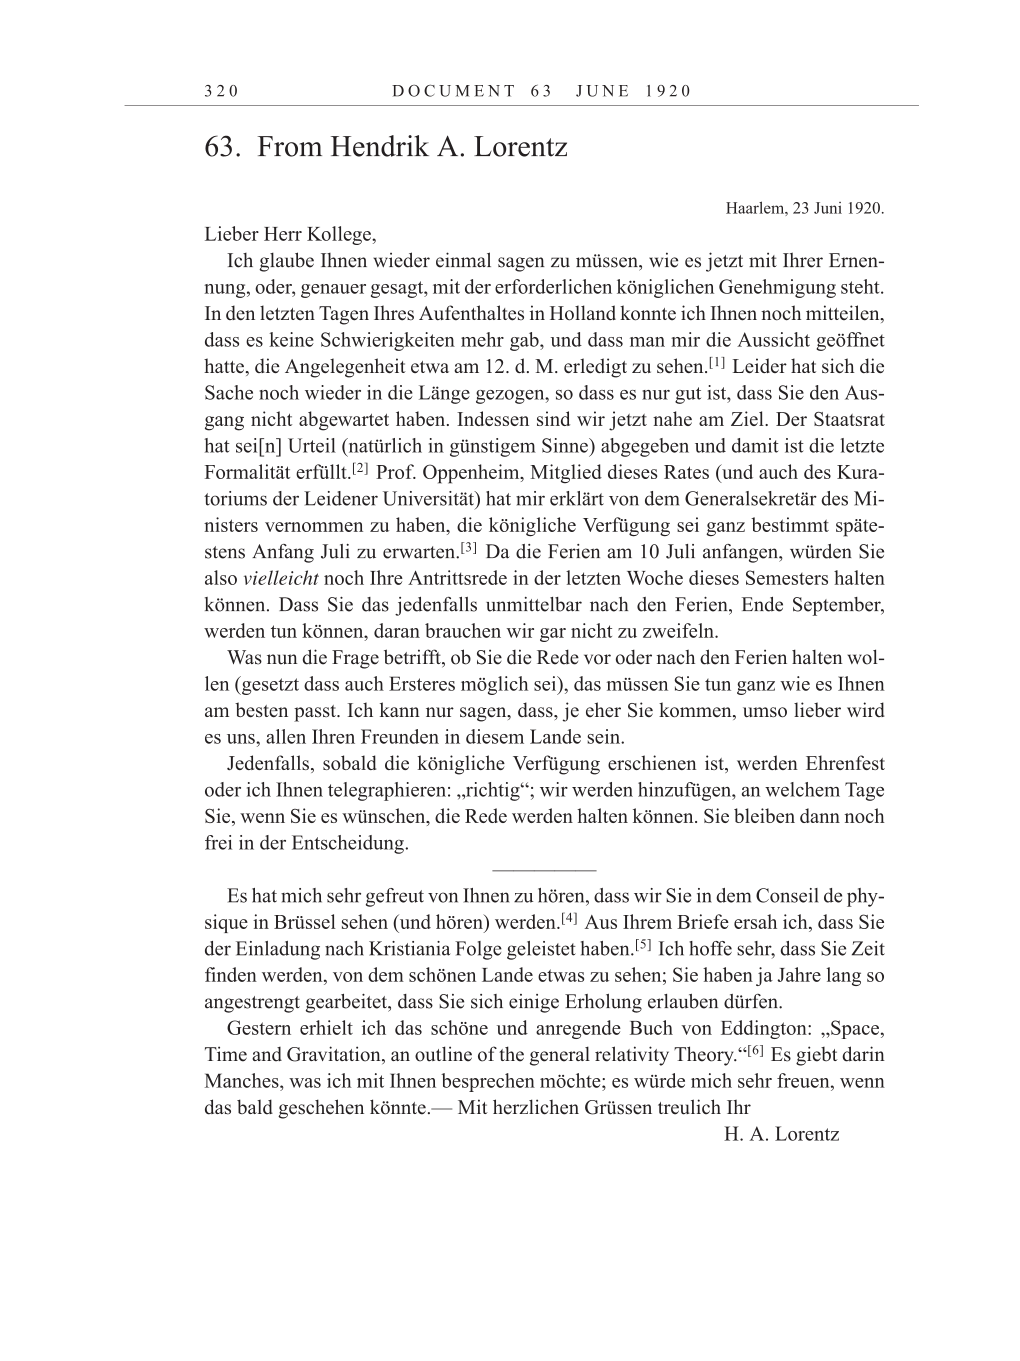 Volume 10: The Berlin Years: Correspondence May-December 1920 / Supplementary Correspondence 1909-1920 page 320